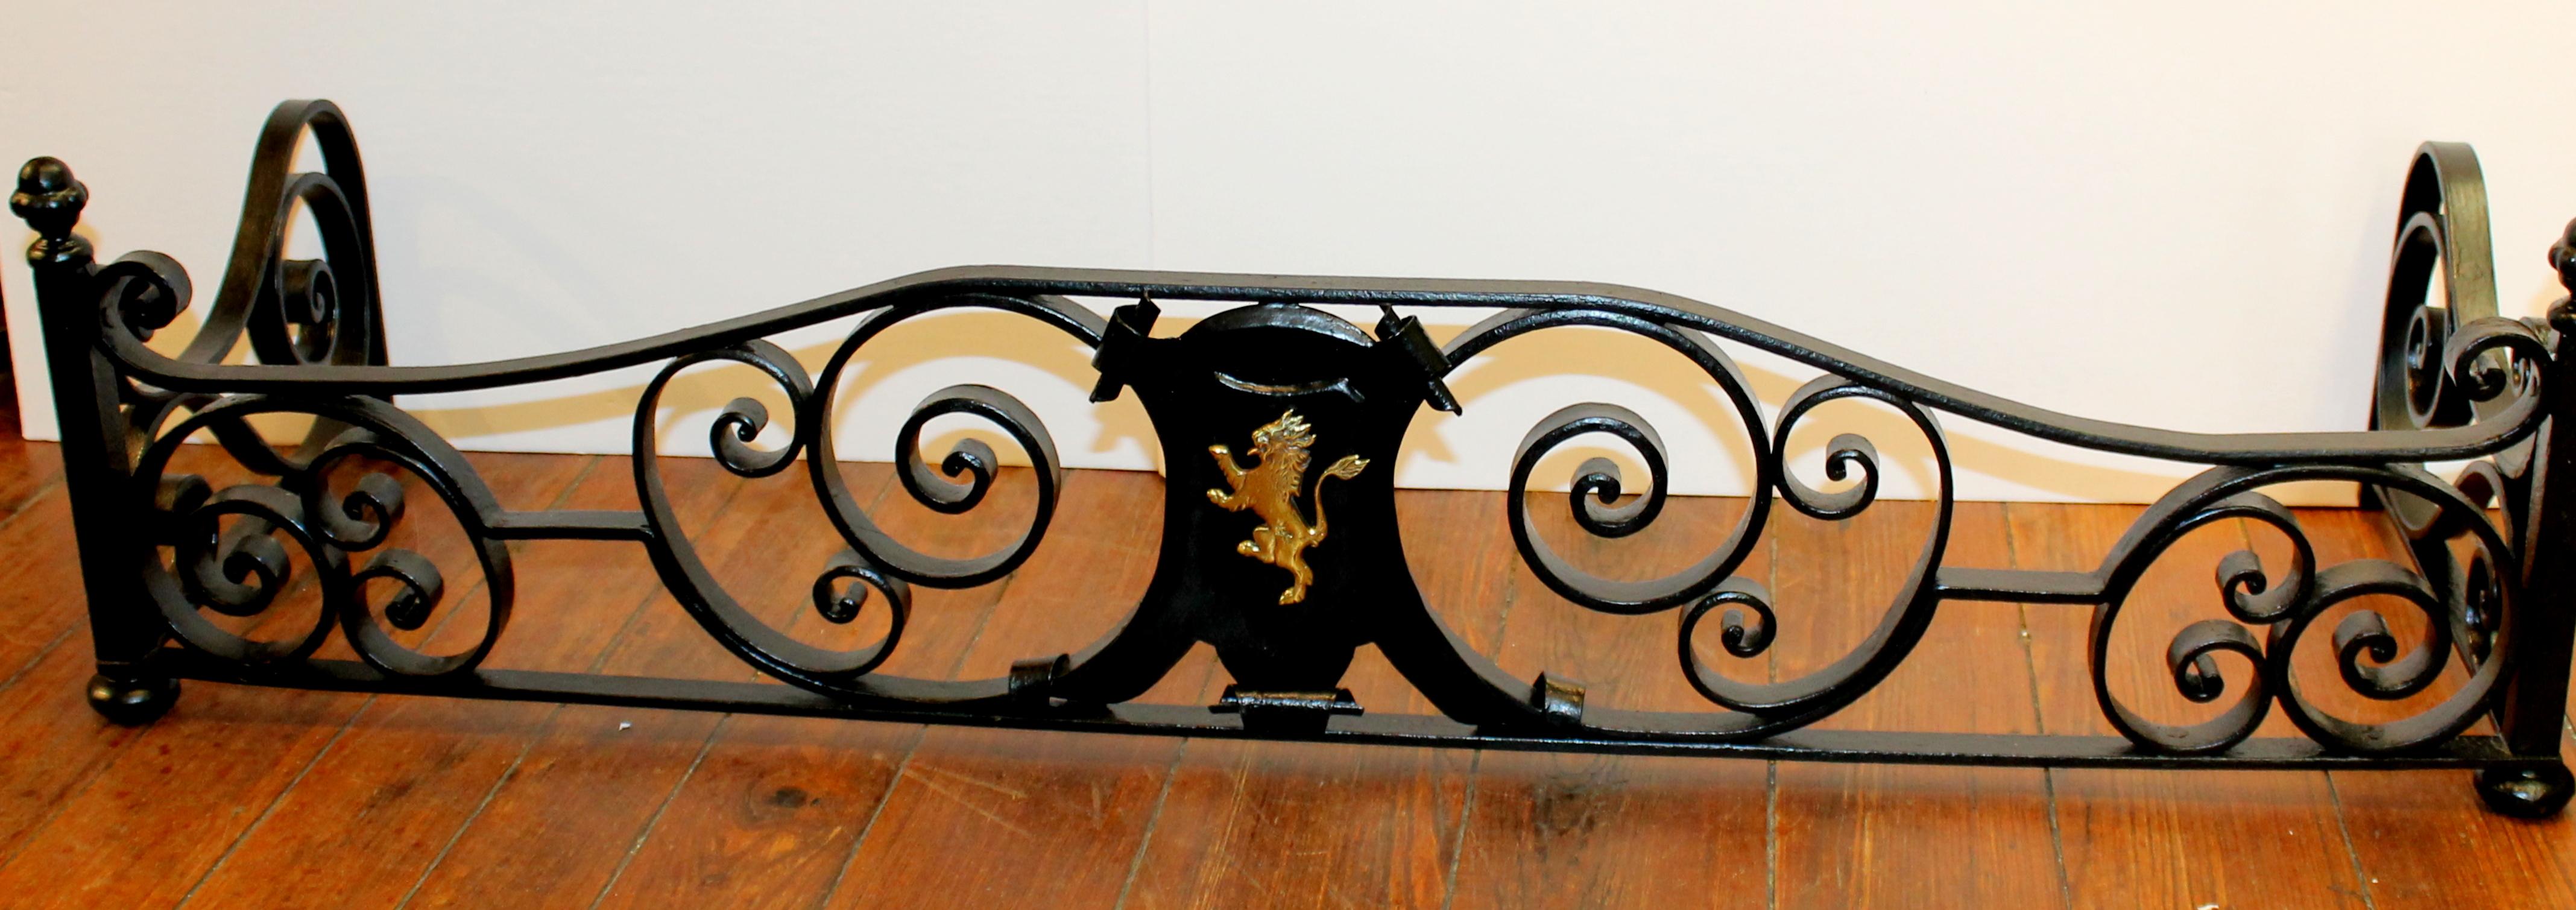 Extraordinarily fine antique English hand wrought iron and cast brass fireplace fender

Please note superbly hand wrought very heavy ironwork and cast brass 